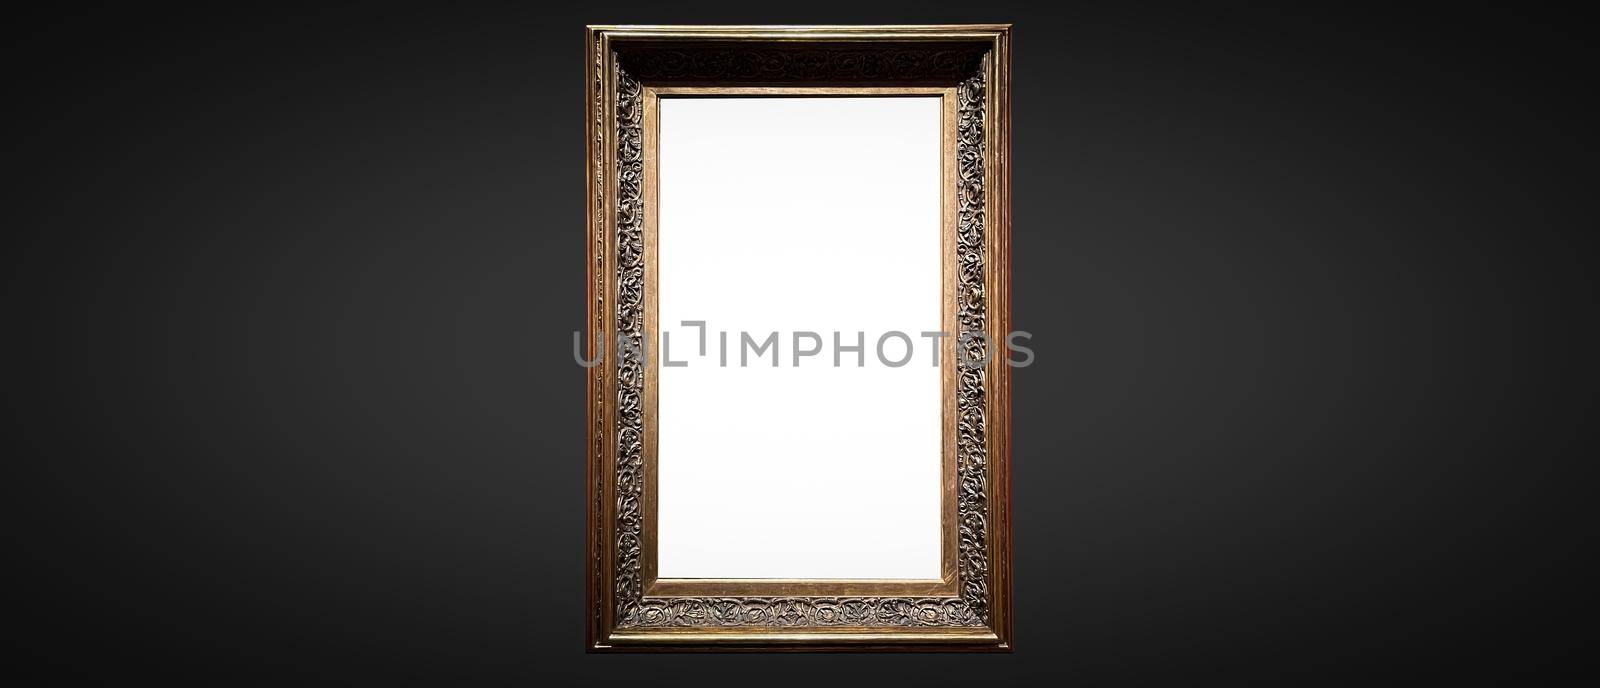 Antique art fair gallery frame on royal black wall at auction house or museum exhibition, blank template with empty white copyspace for mockup design, artwork concept